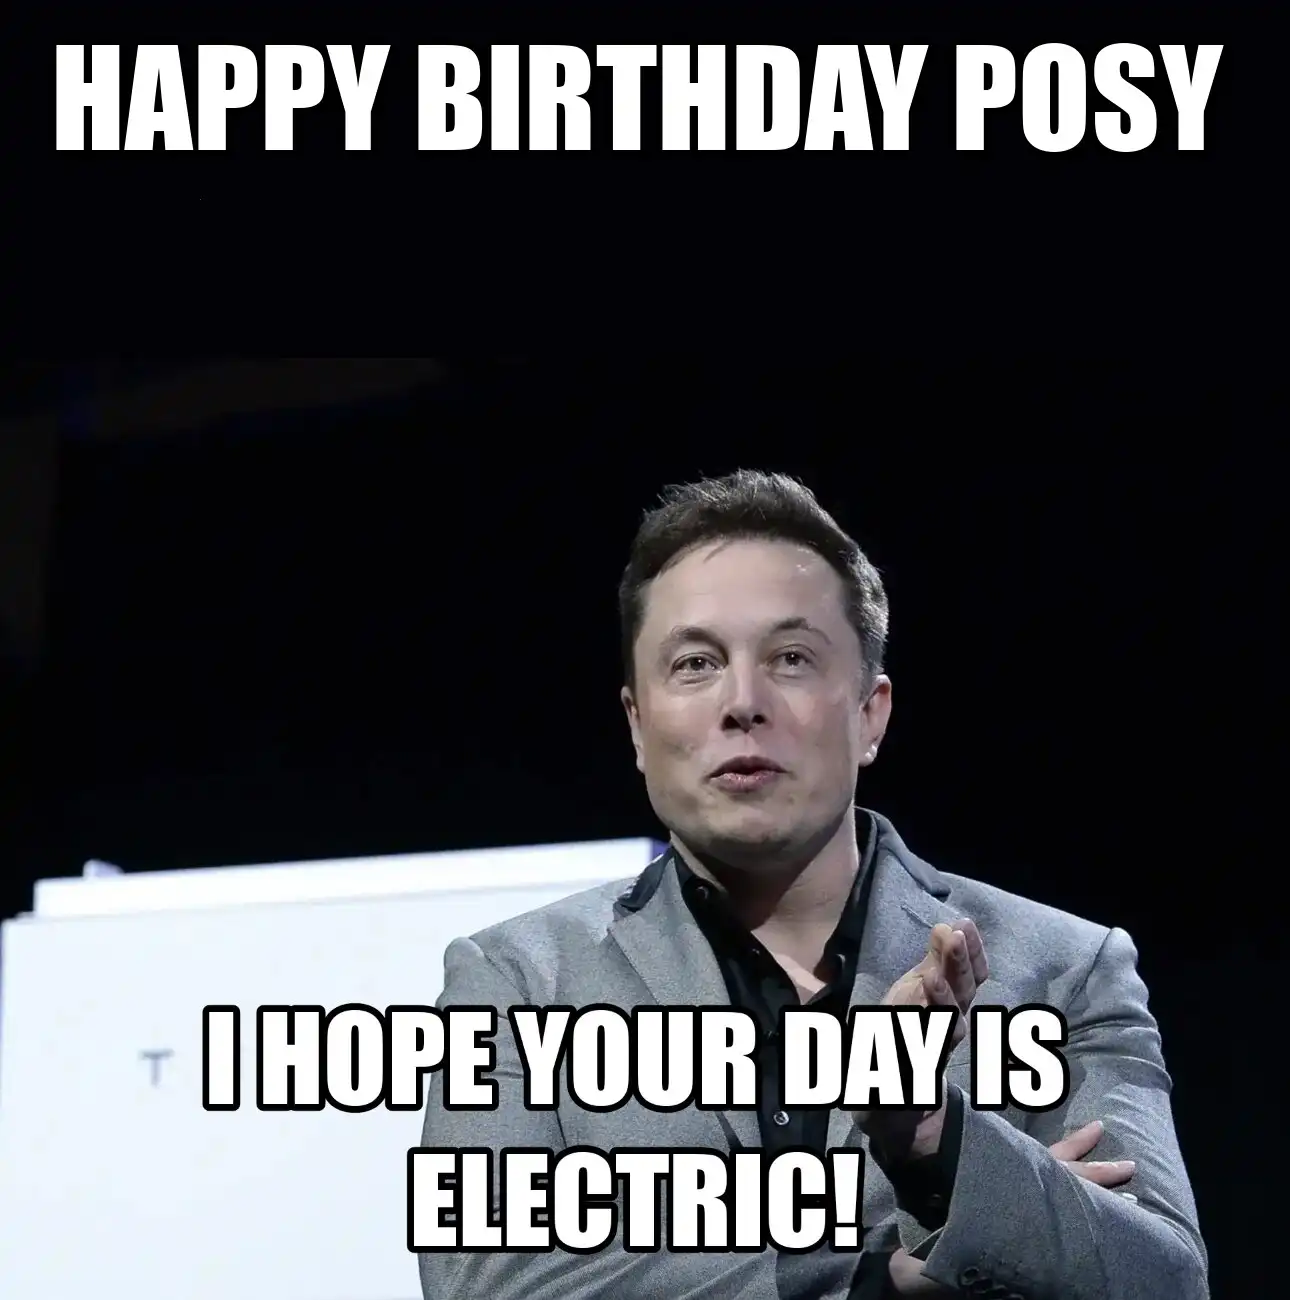 Happy Birthday Posy I Hope Your Day Is Electric Meme